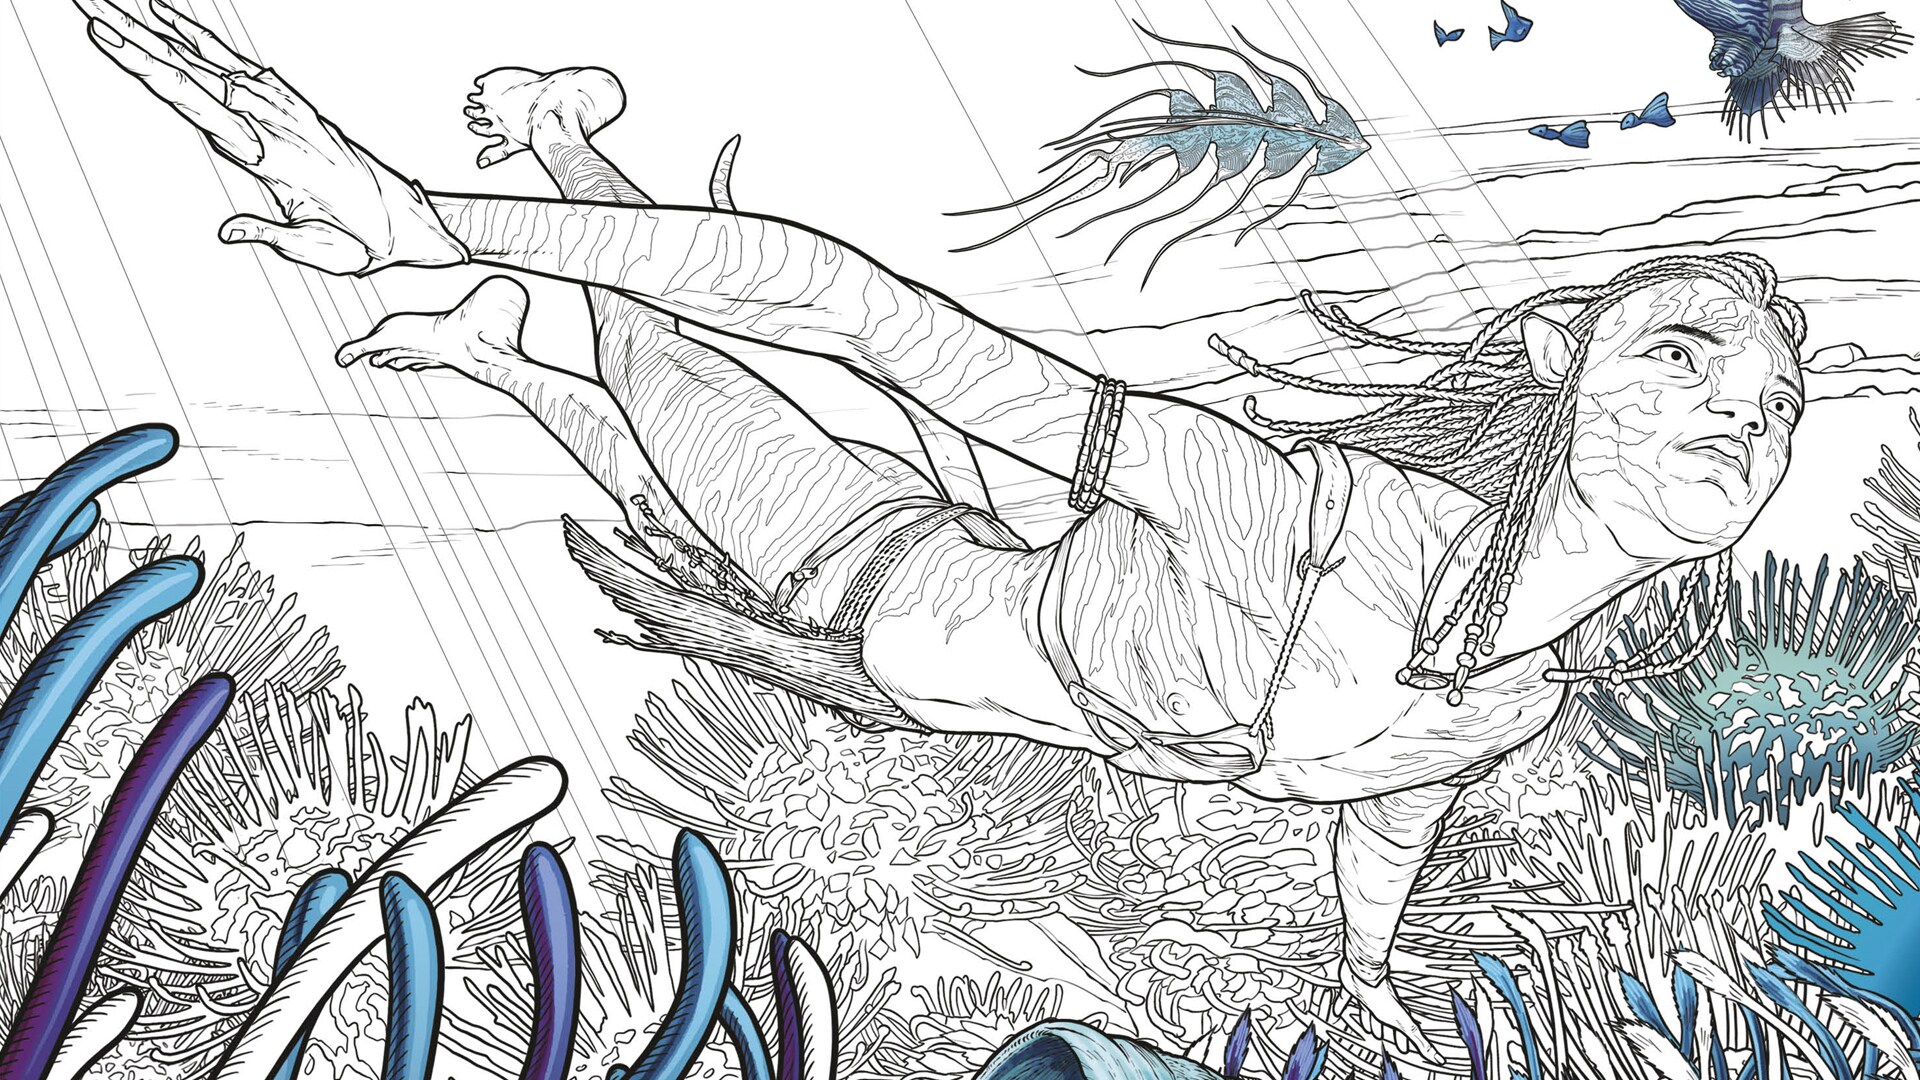 Coloring book image of a Na'vi swimming underwater from Avatar The Coloring Book.